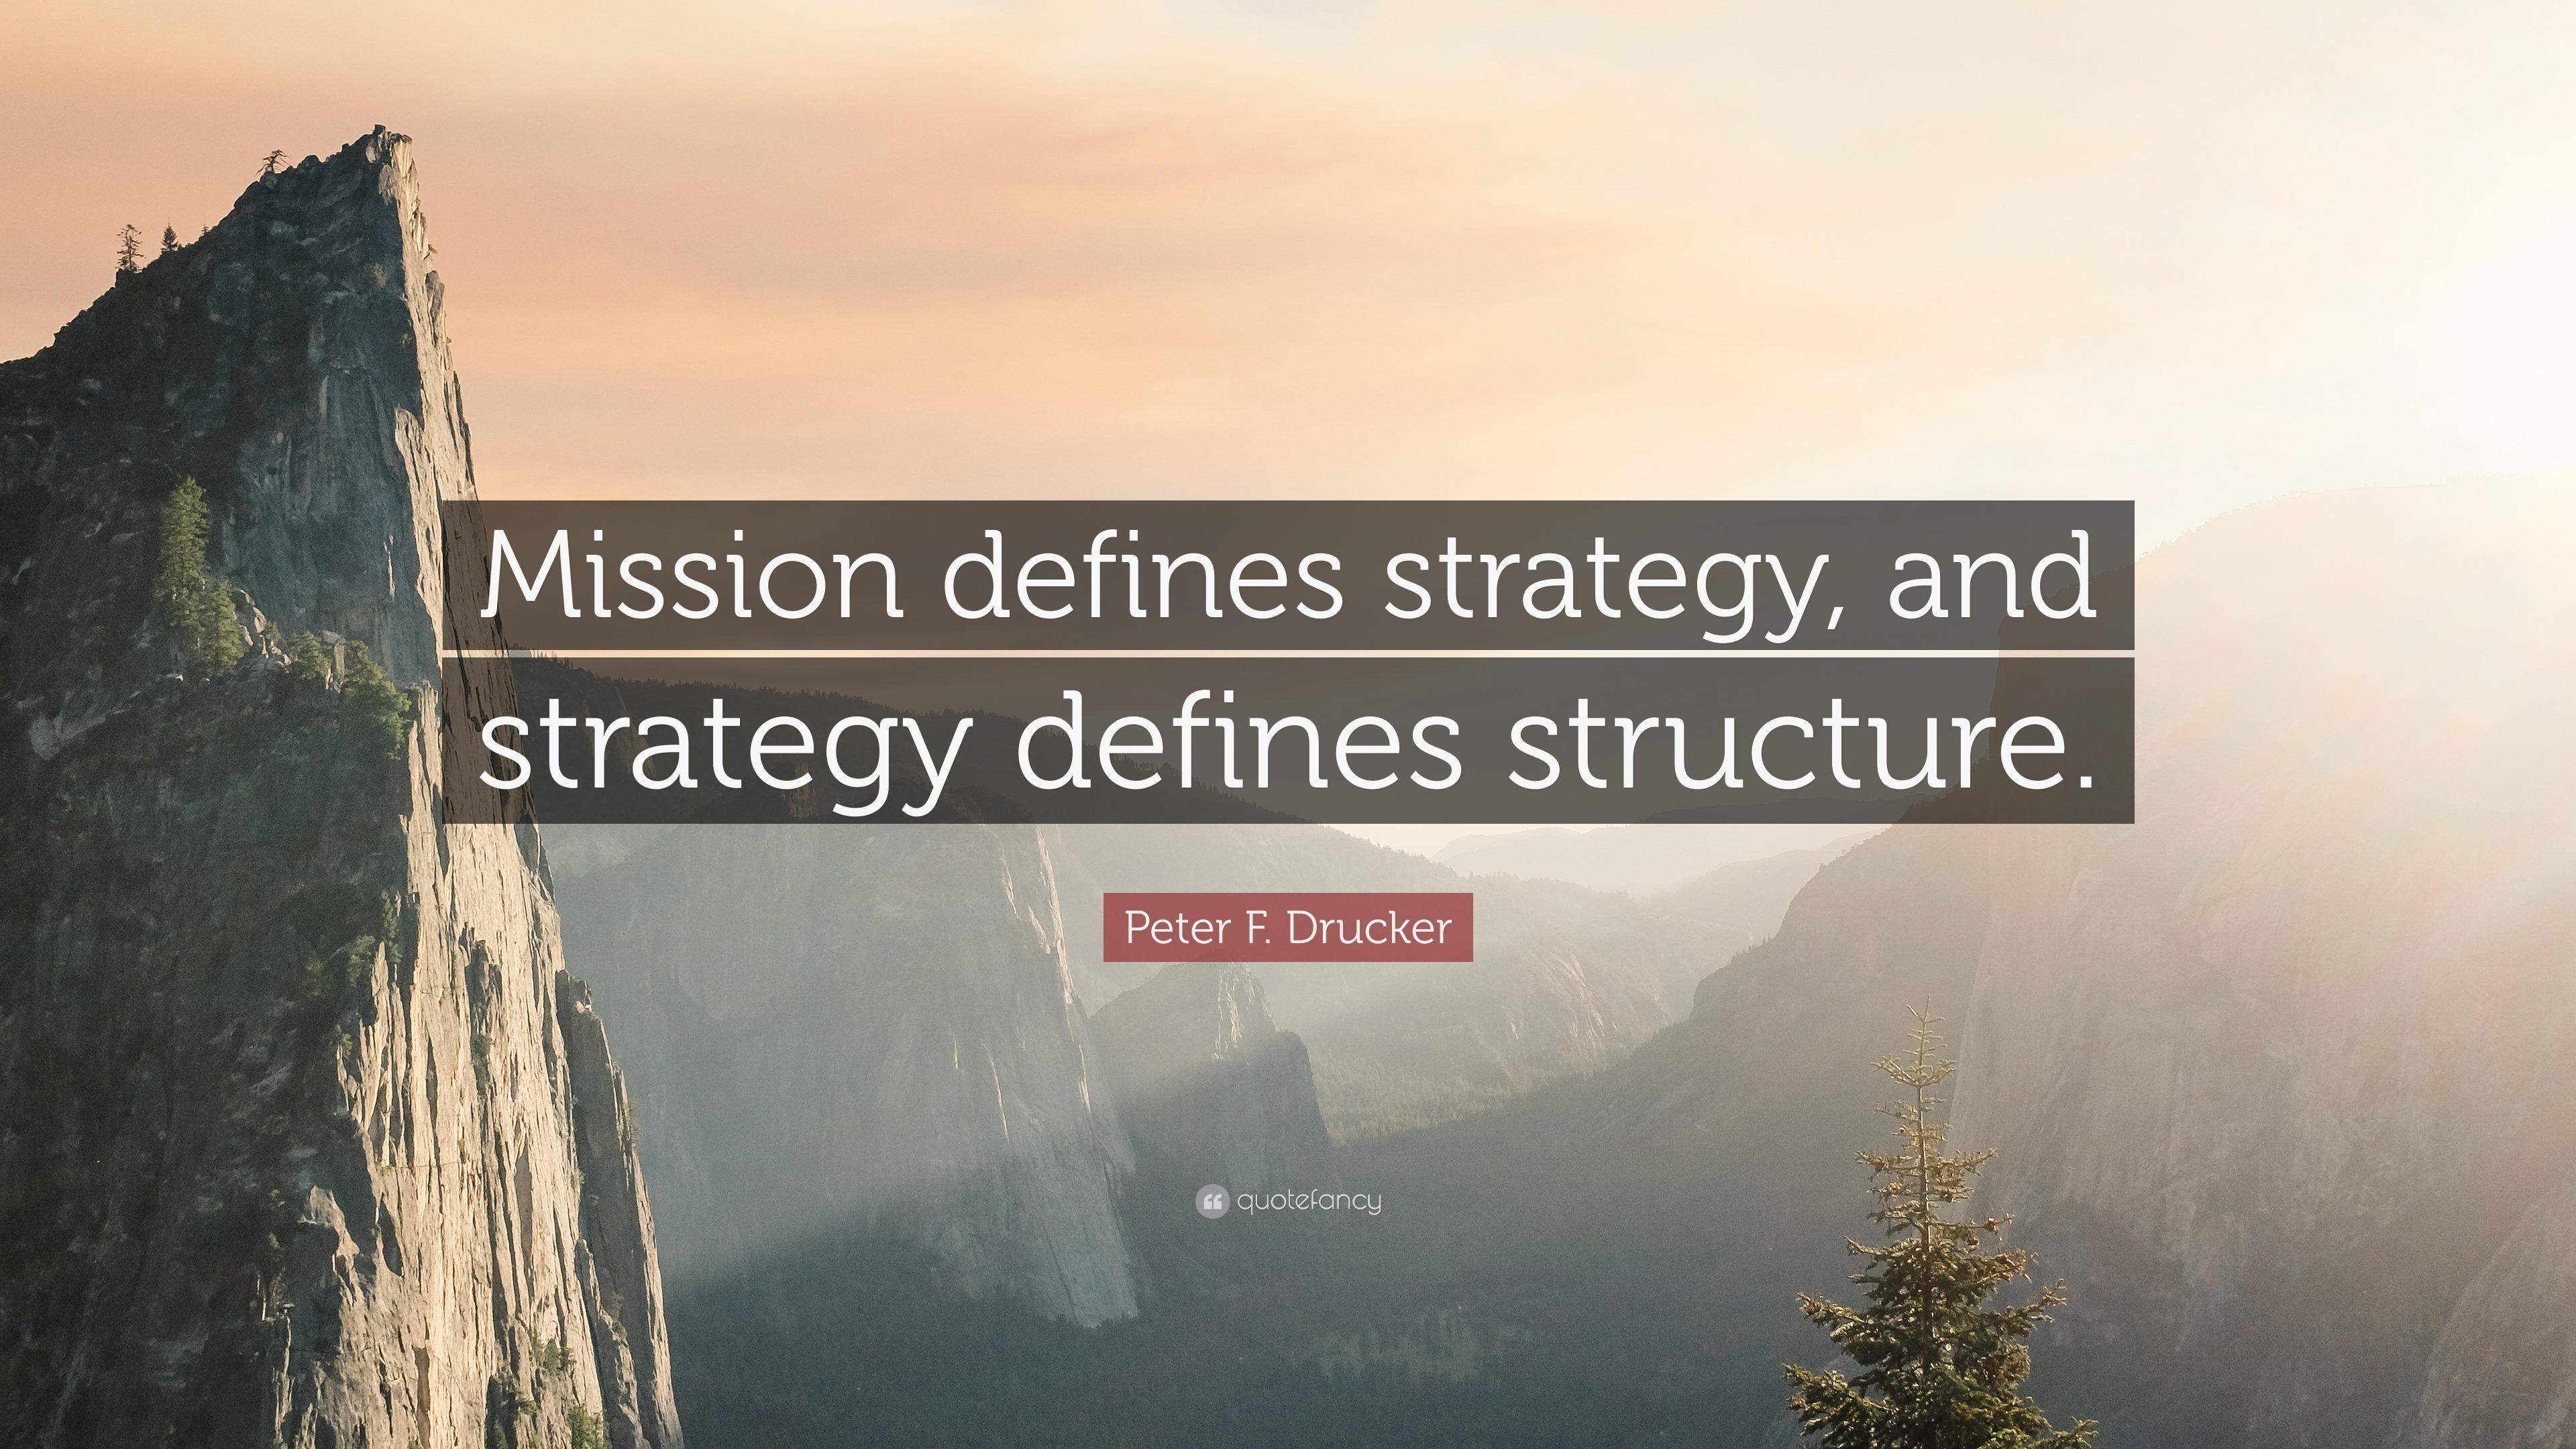 Peter F. Drucker Quote: “Mission defines strategy, and strategy defines